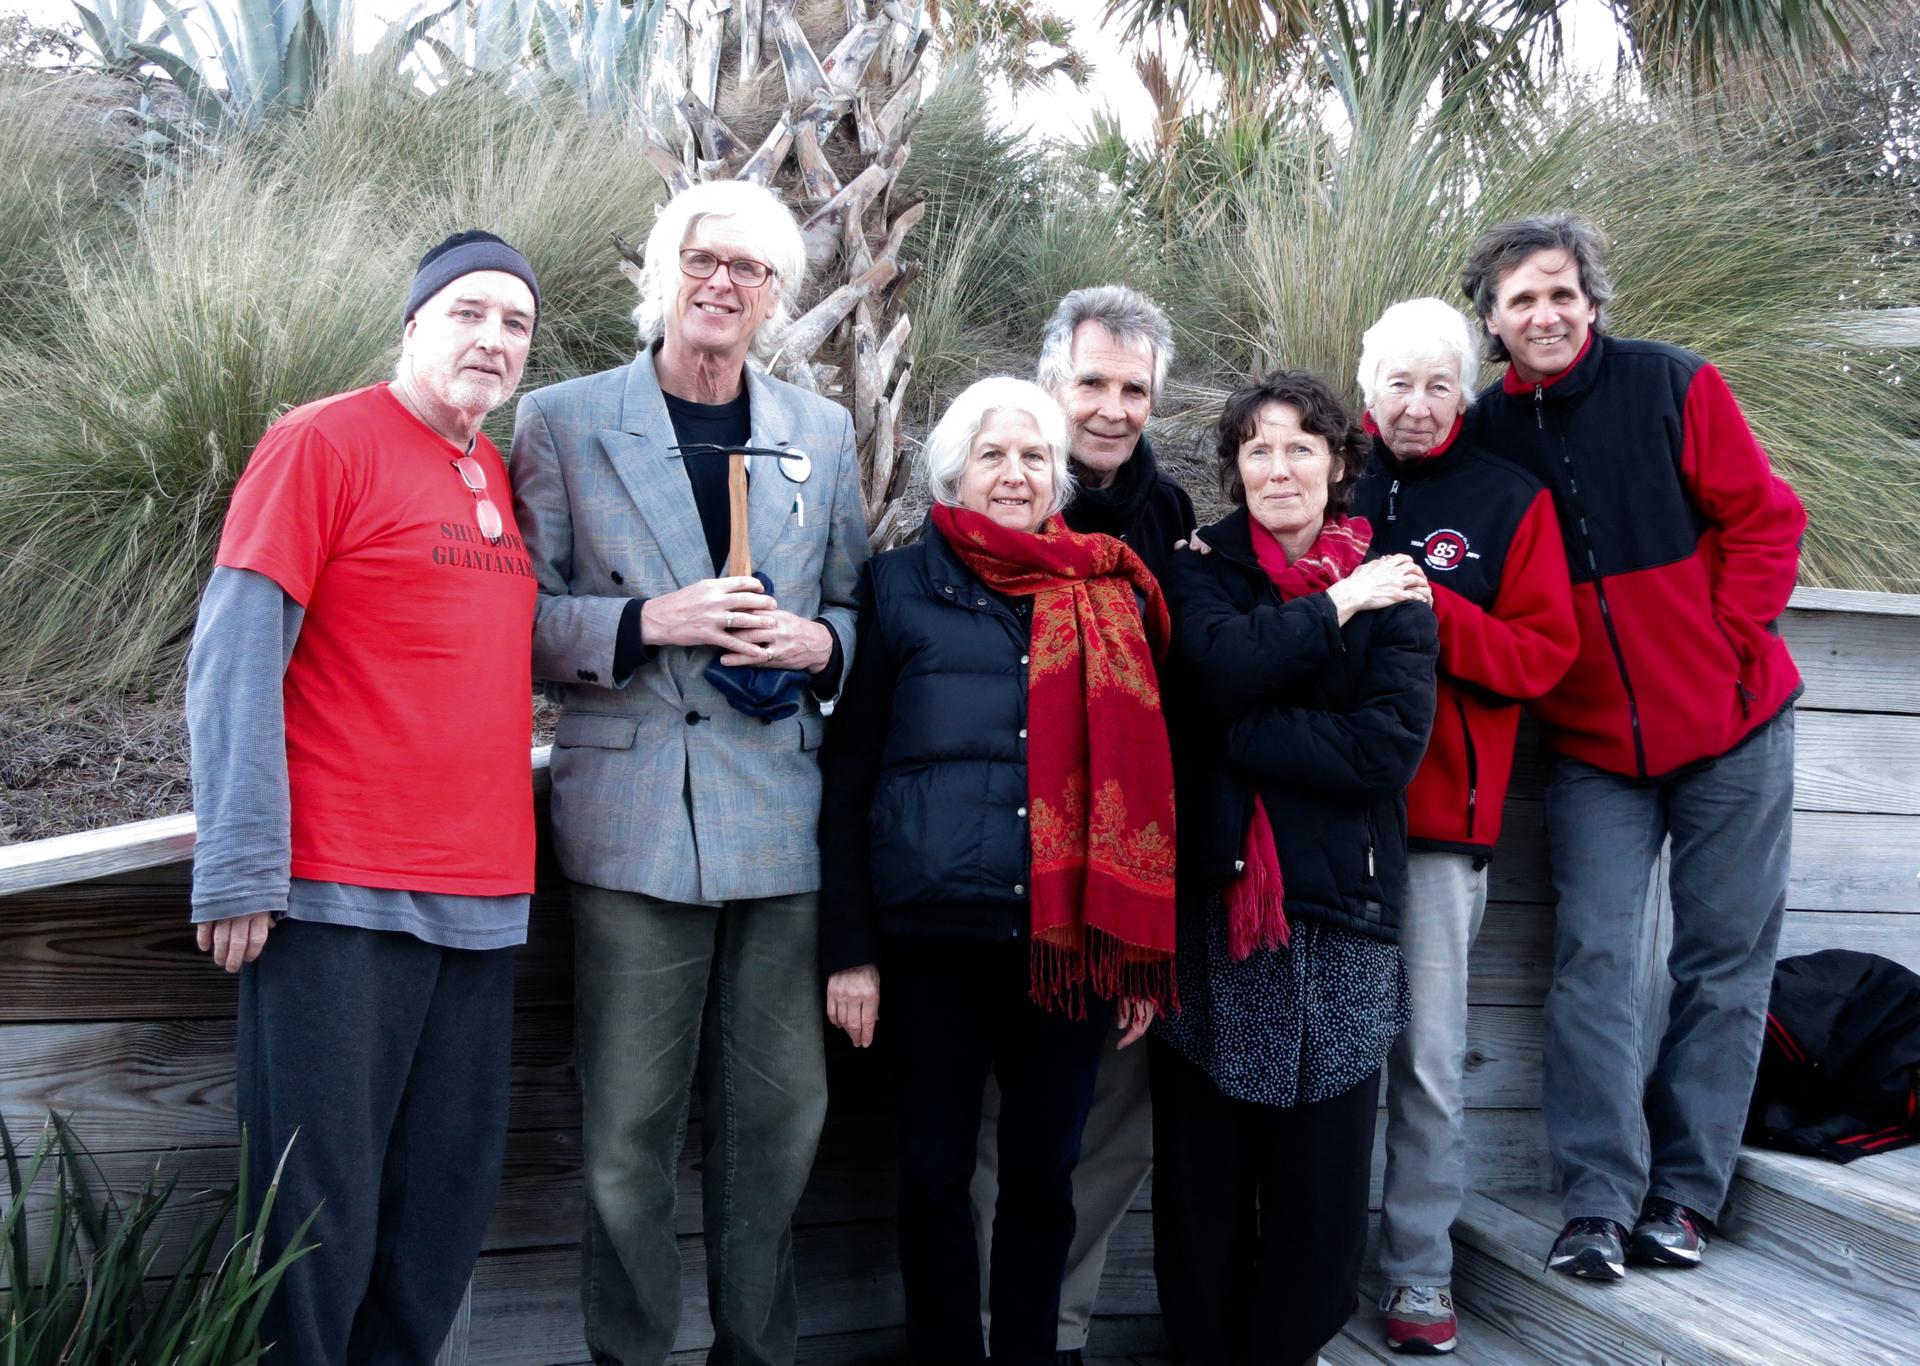 Plowshares 7 activist group poses for photograph wearing the colors red and black.